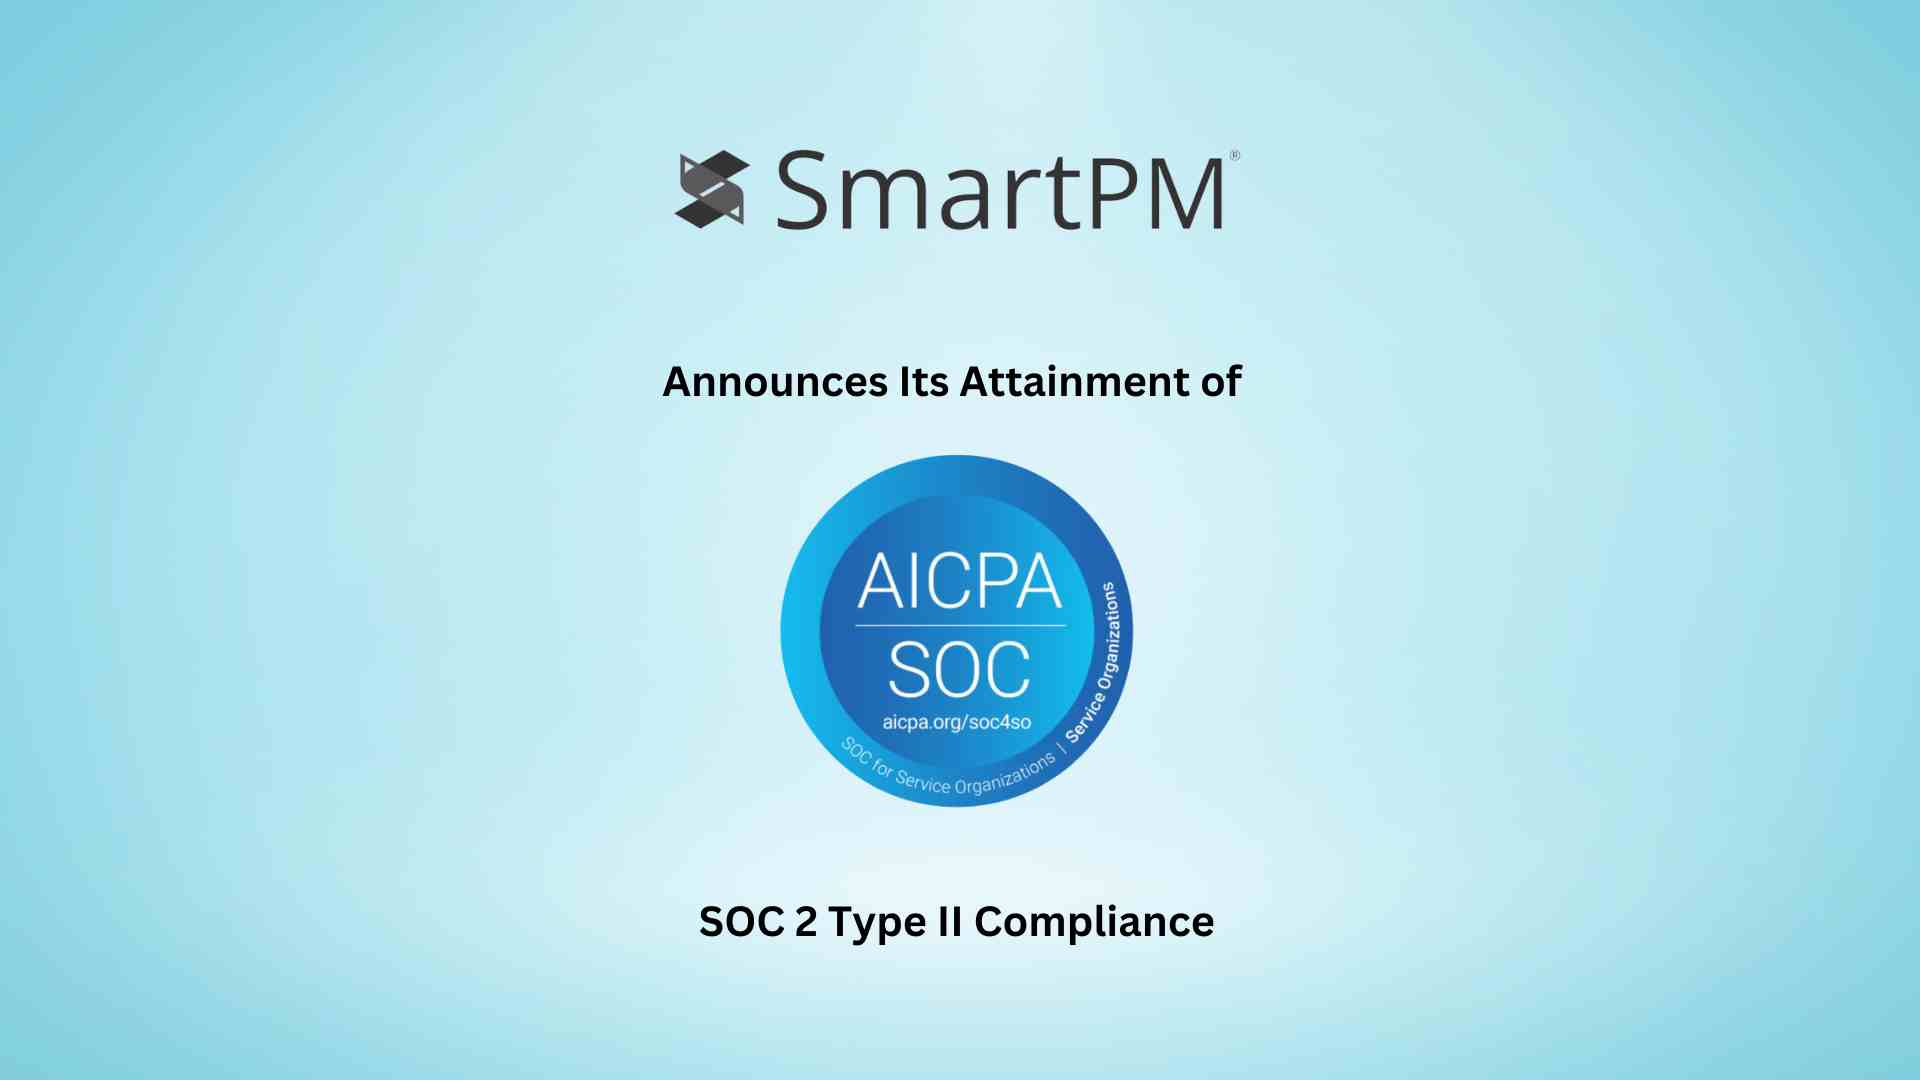 SmartPM Achieves SOC 2 Type II Compliance, Demonstrating Continued Commitment to Data Security and Privacy